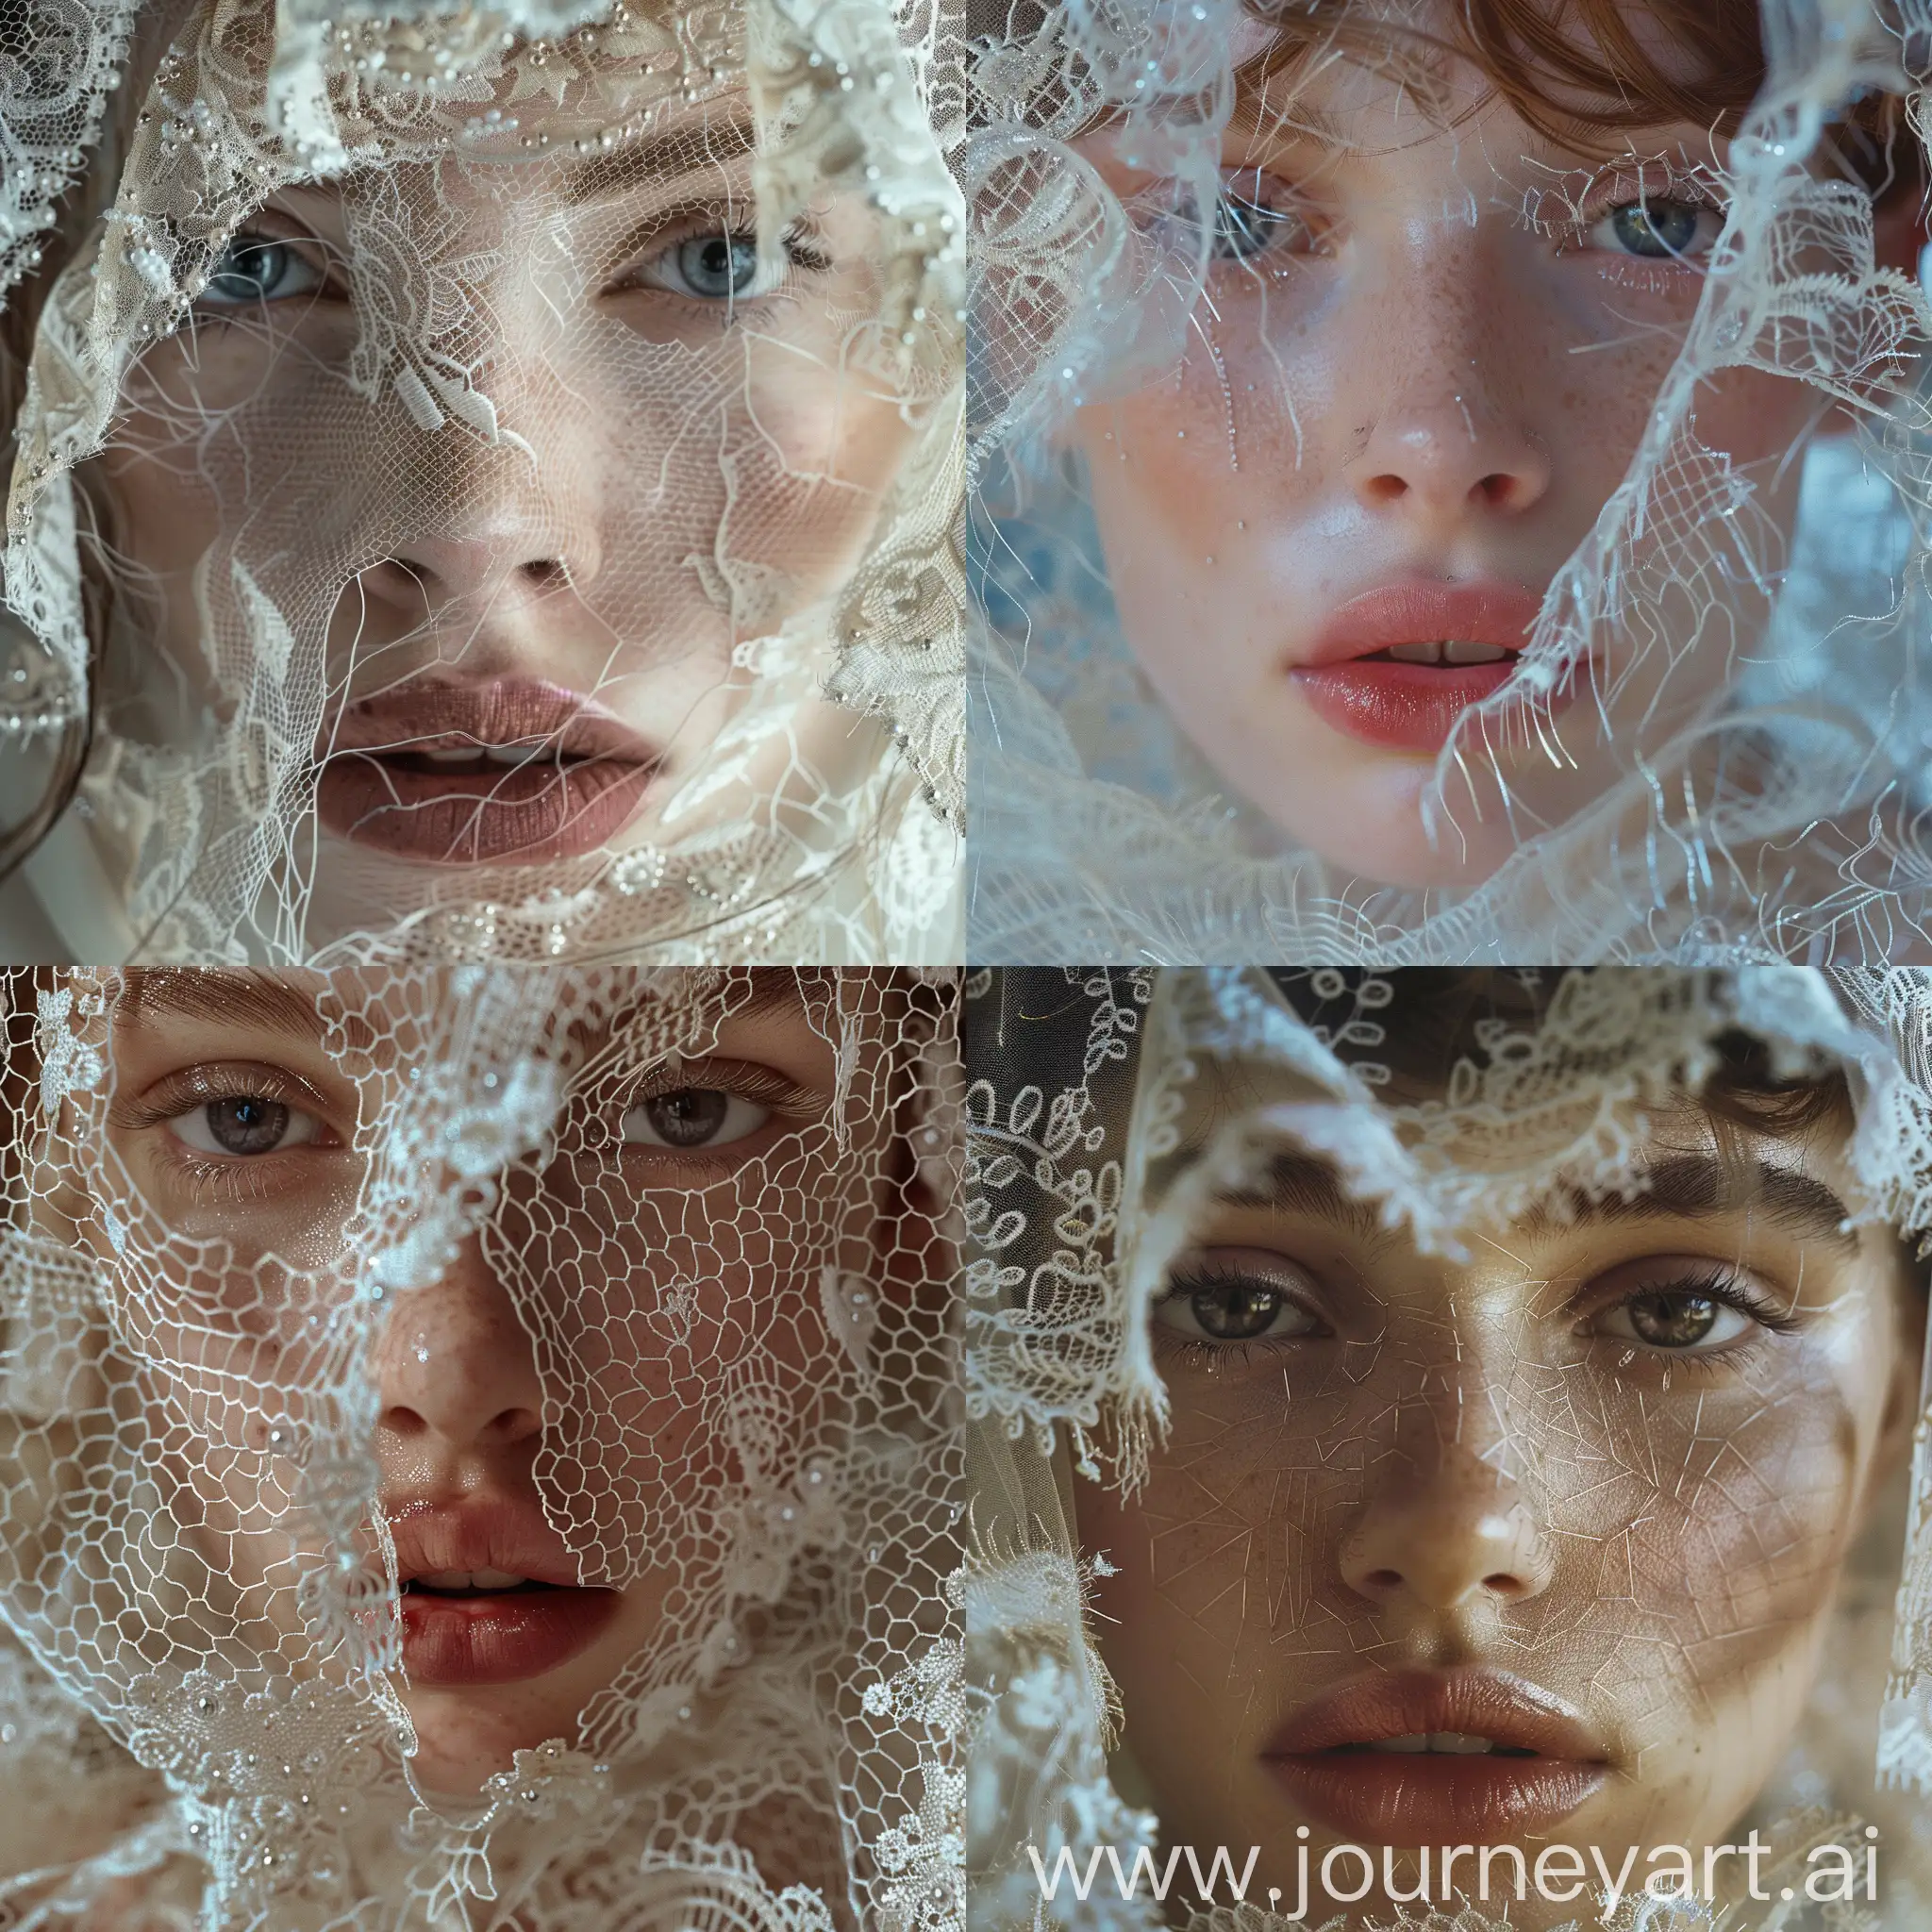 Victorian-Cyborg-Princess-with-Guipure-Veil-90s-Aesthetic-CloseUp-Photoshoot-for-Vogue-and-Kinfolk-Magazine